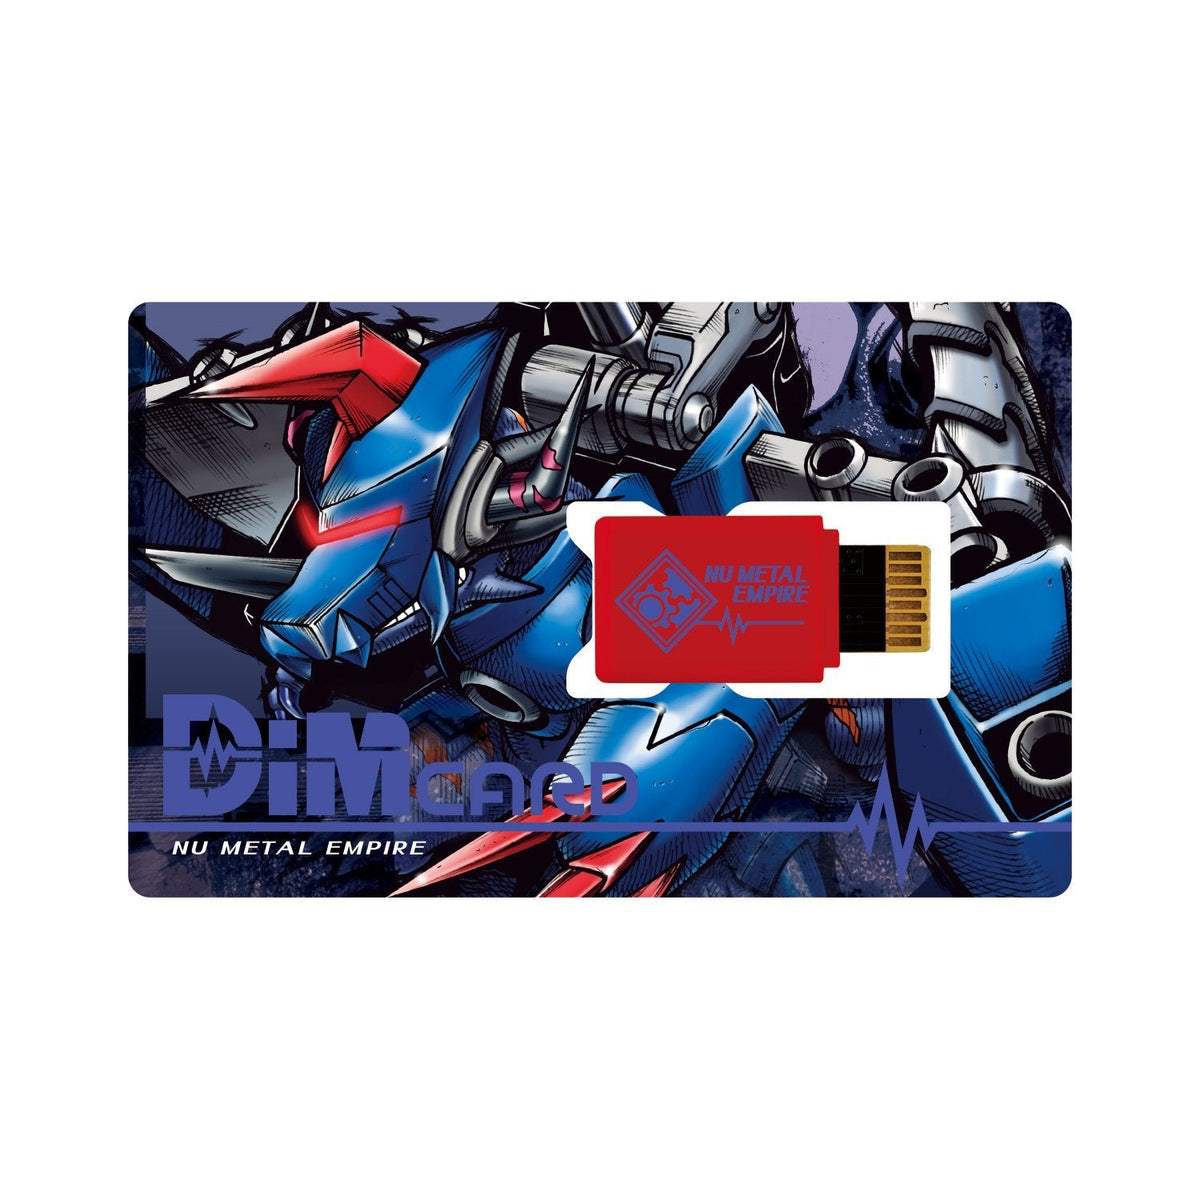 Digimon Vital Breath Digital Monster -Dim Card Set Vol.3 Hermit In The Jungle &amp; Nu Metal Empire-Bandai-Ace Cards &amp; Collectibles